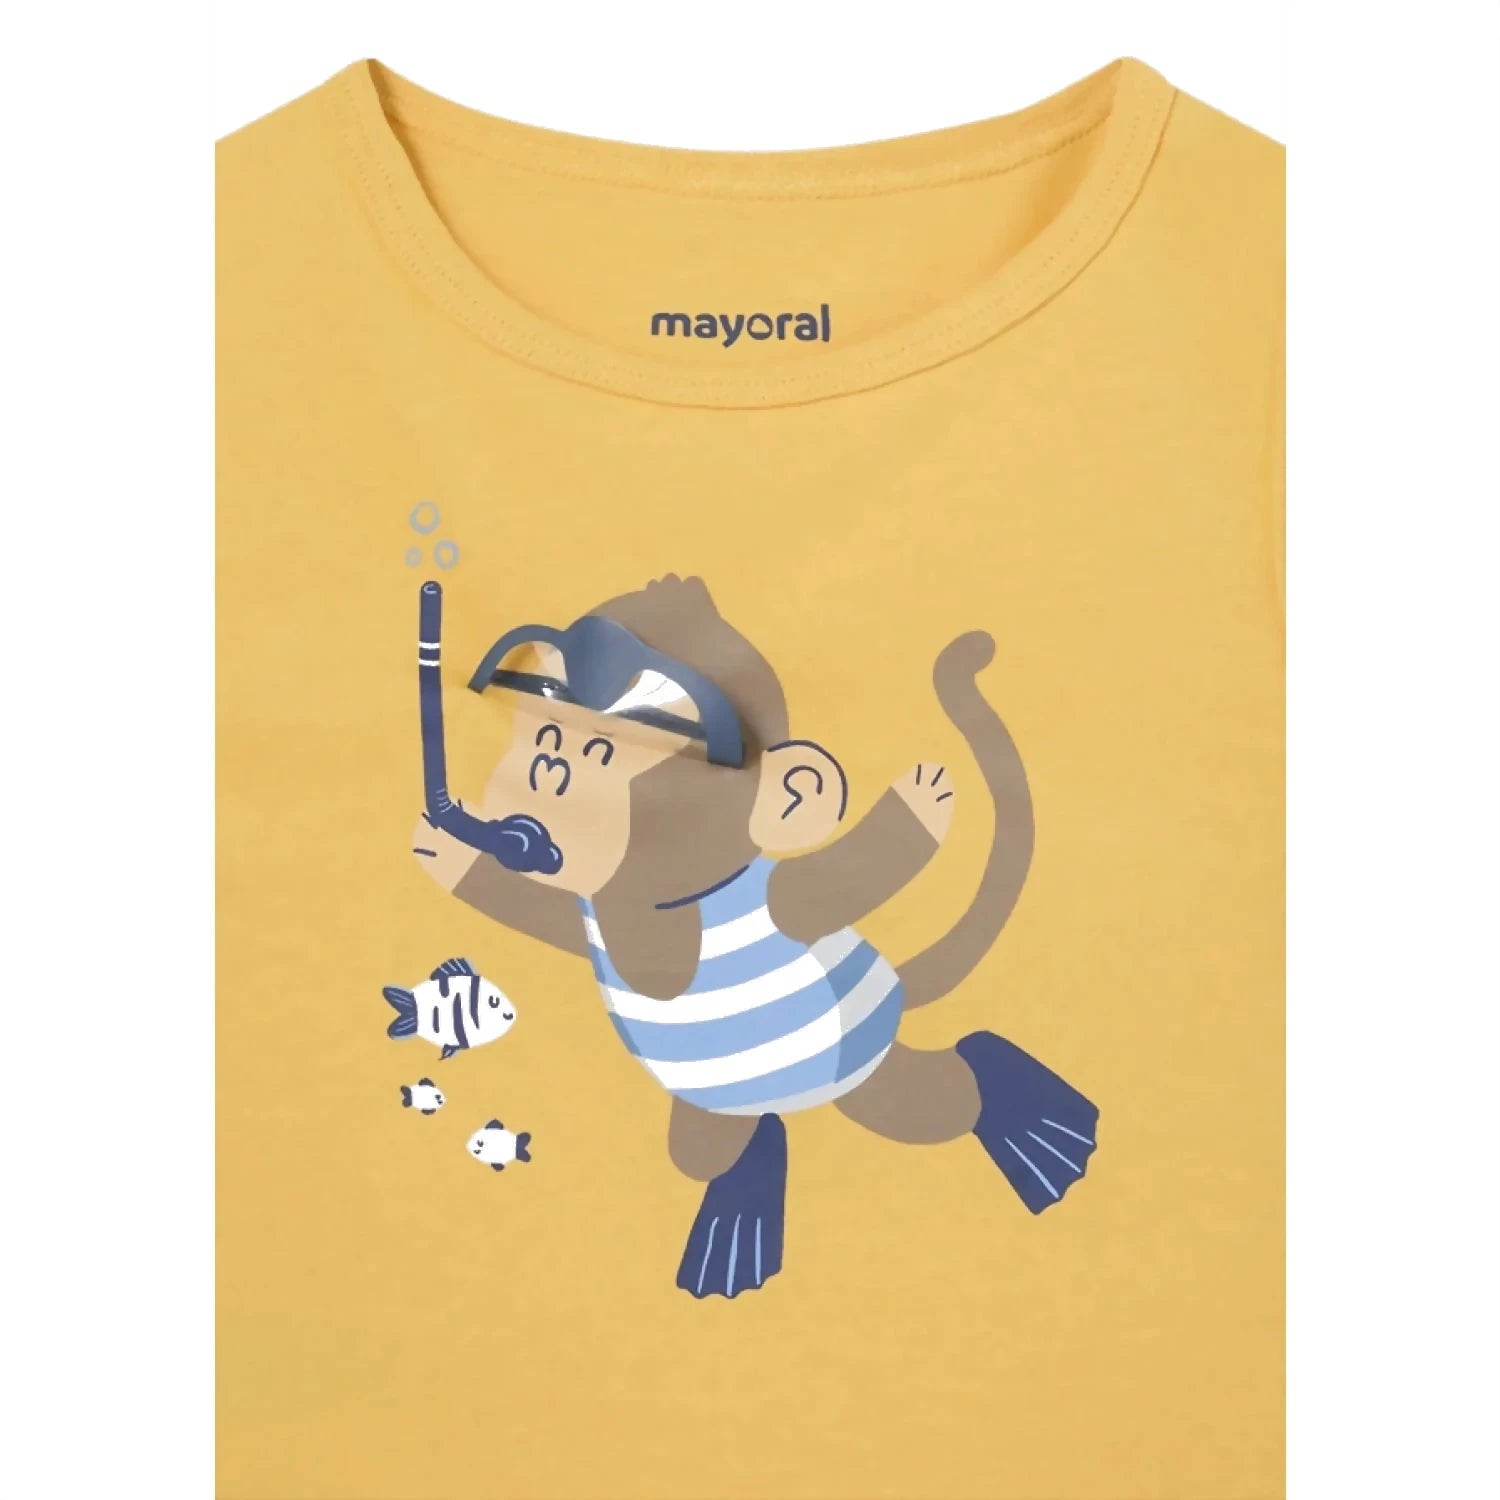 Mayoral Baby Tank Top, Banana, front view flat zoomed in 